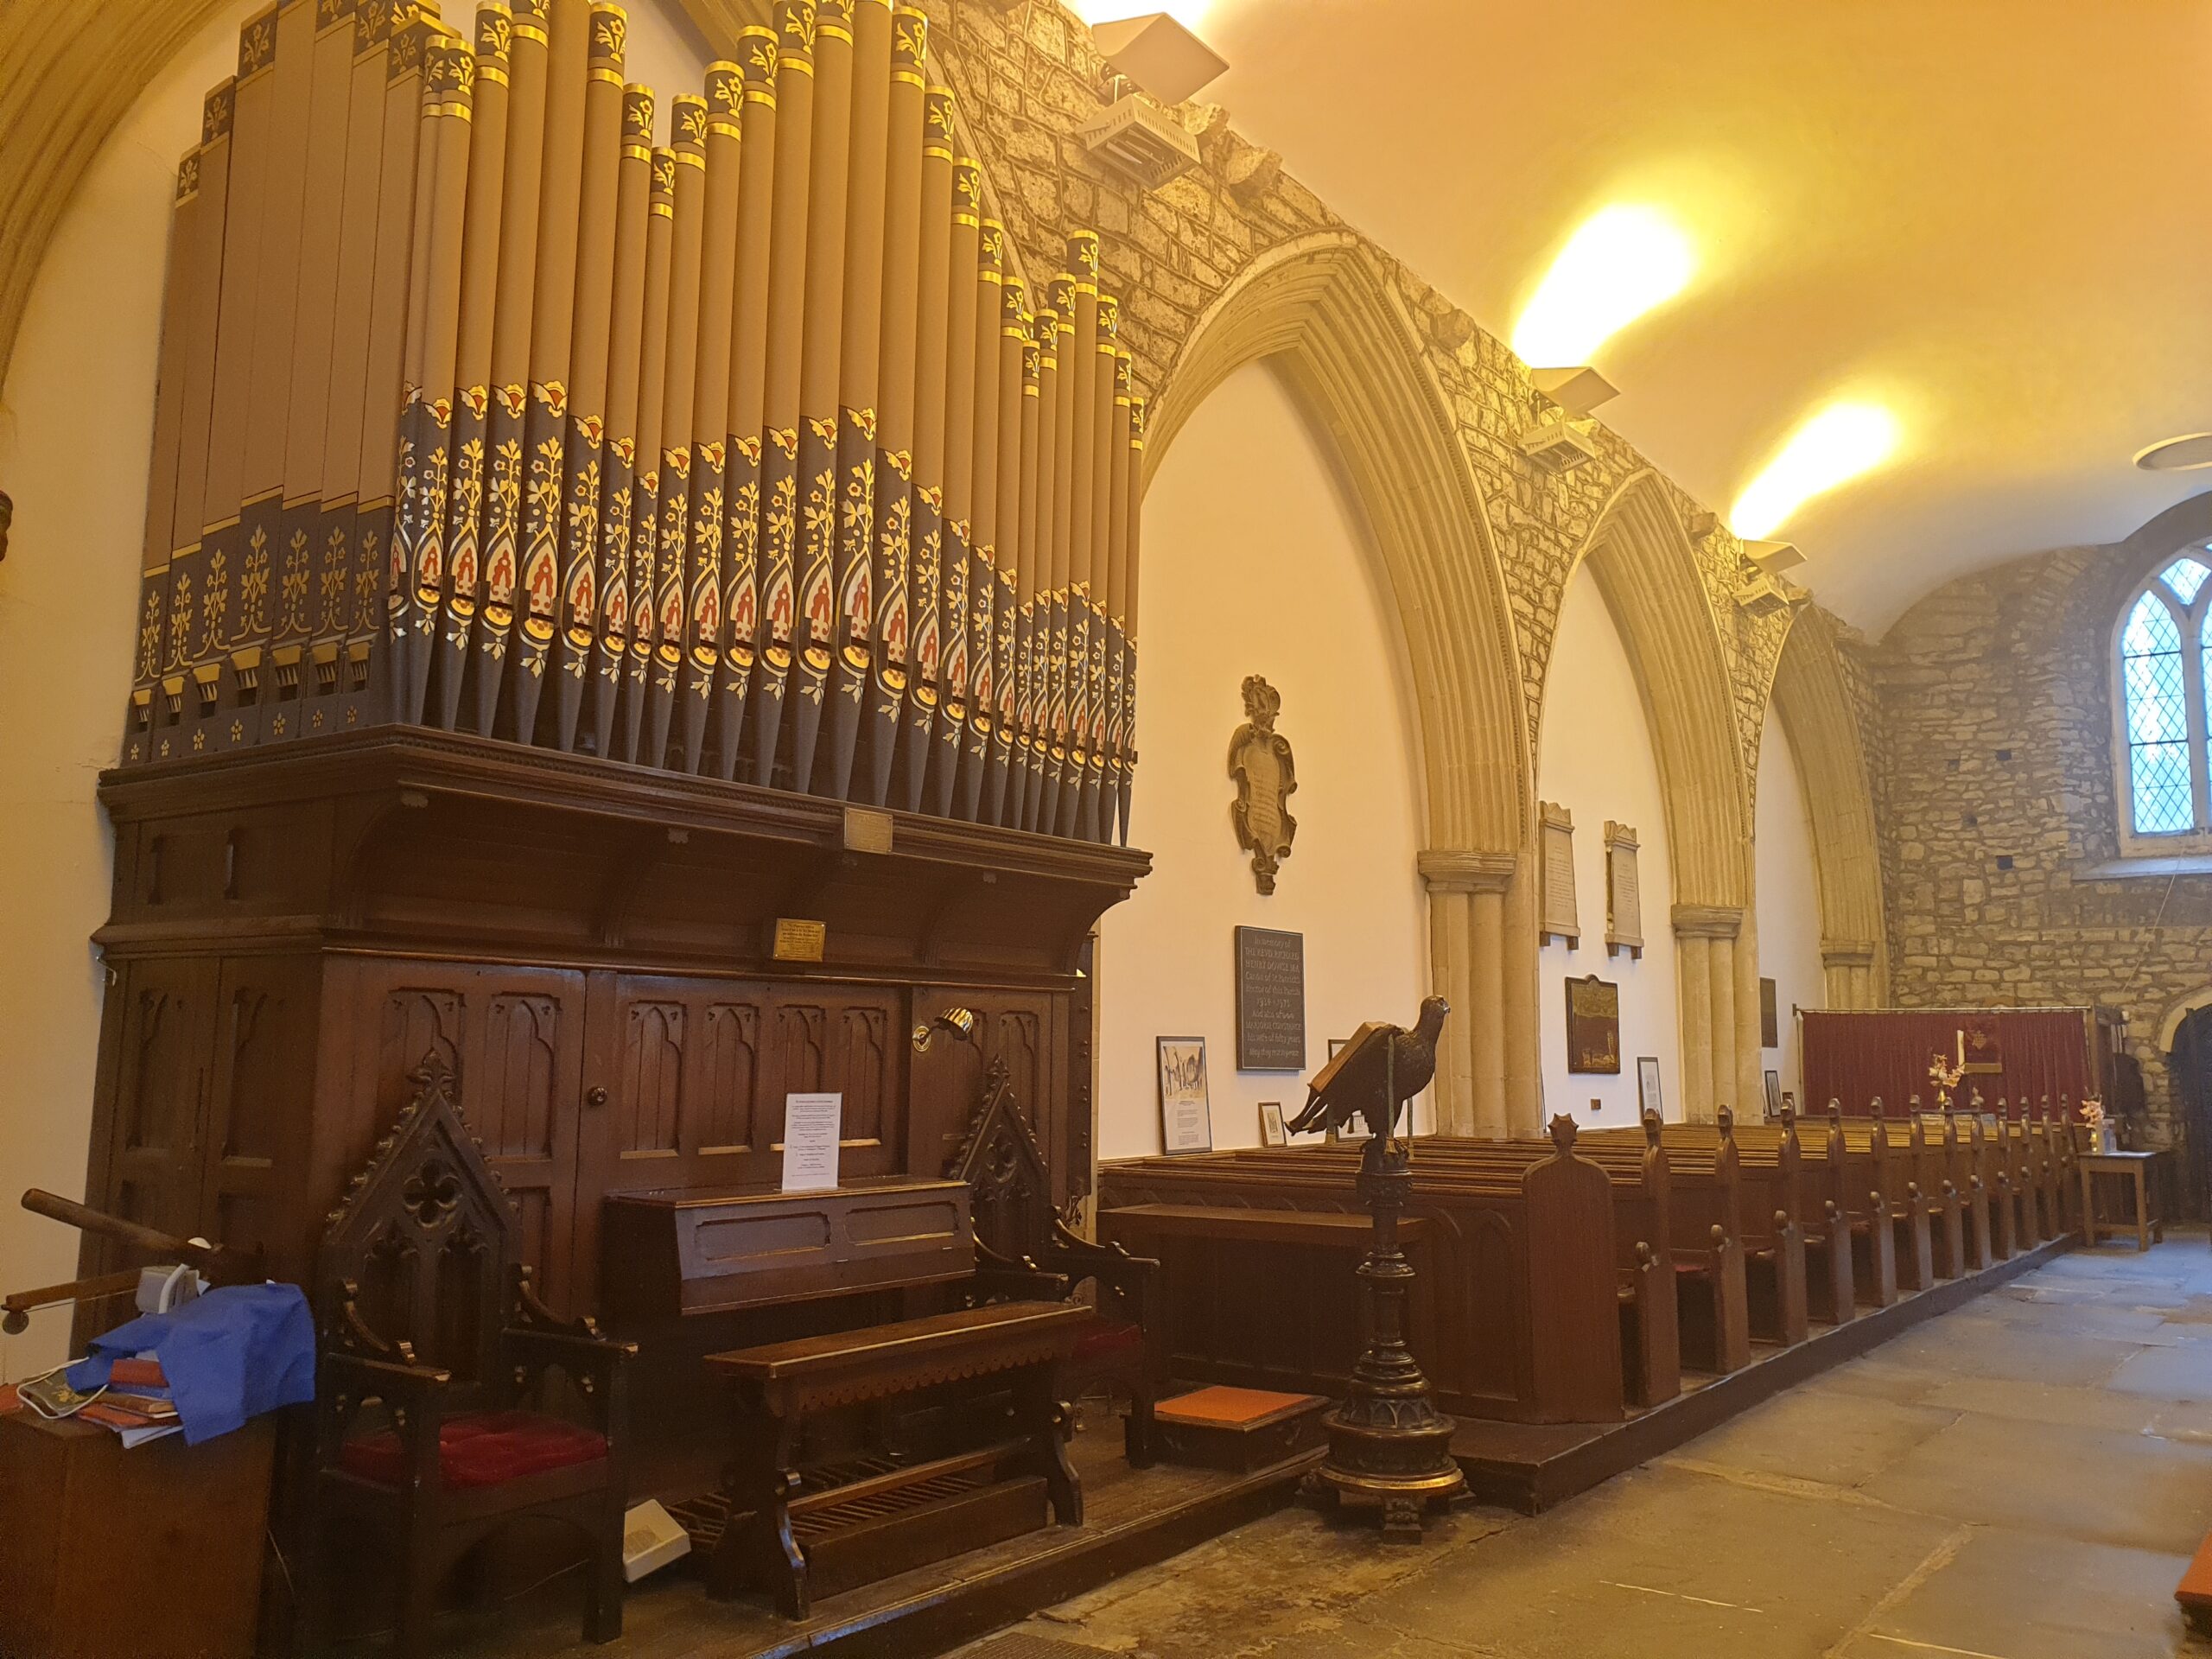 A view from inside the church of the South wall, where you can see the19th century organ and the late 13th century gothic arches.